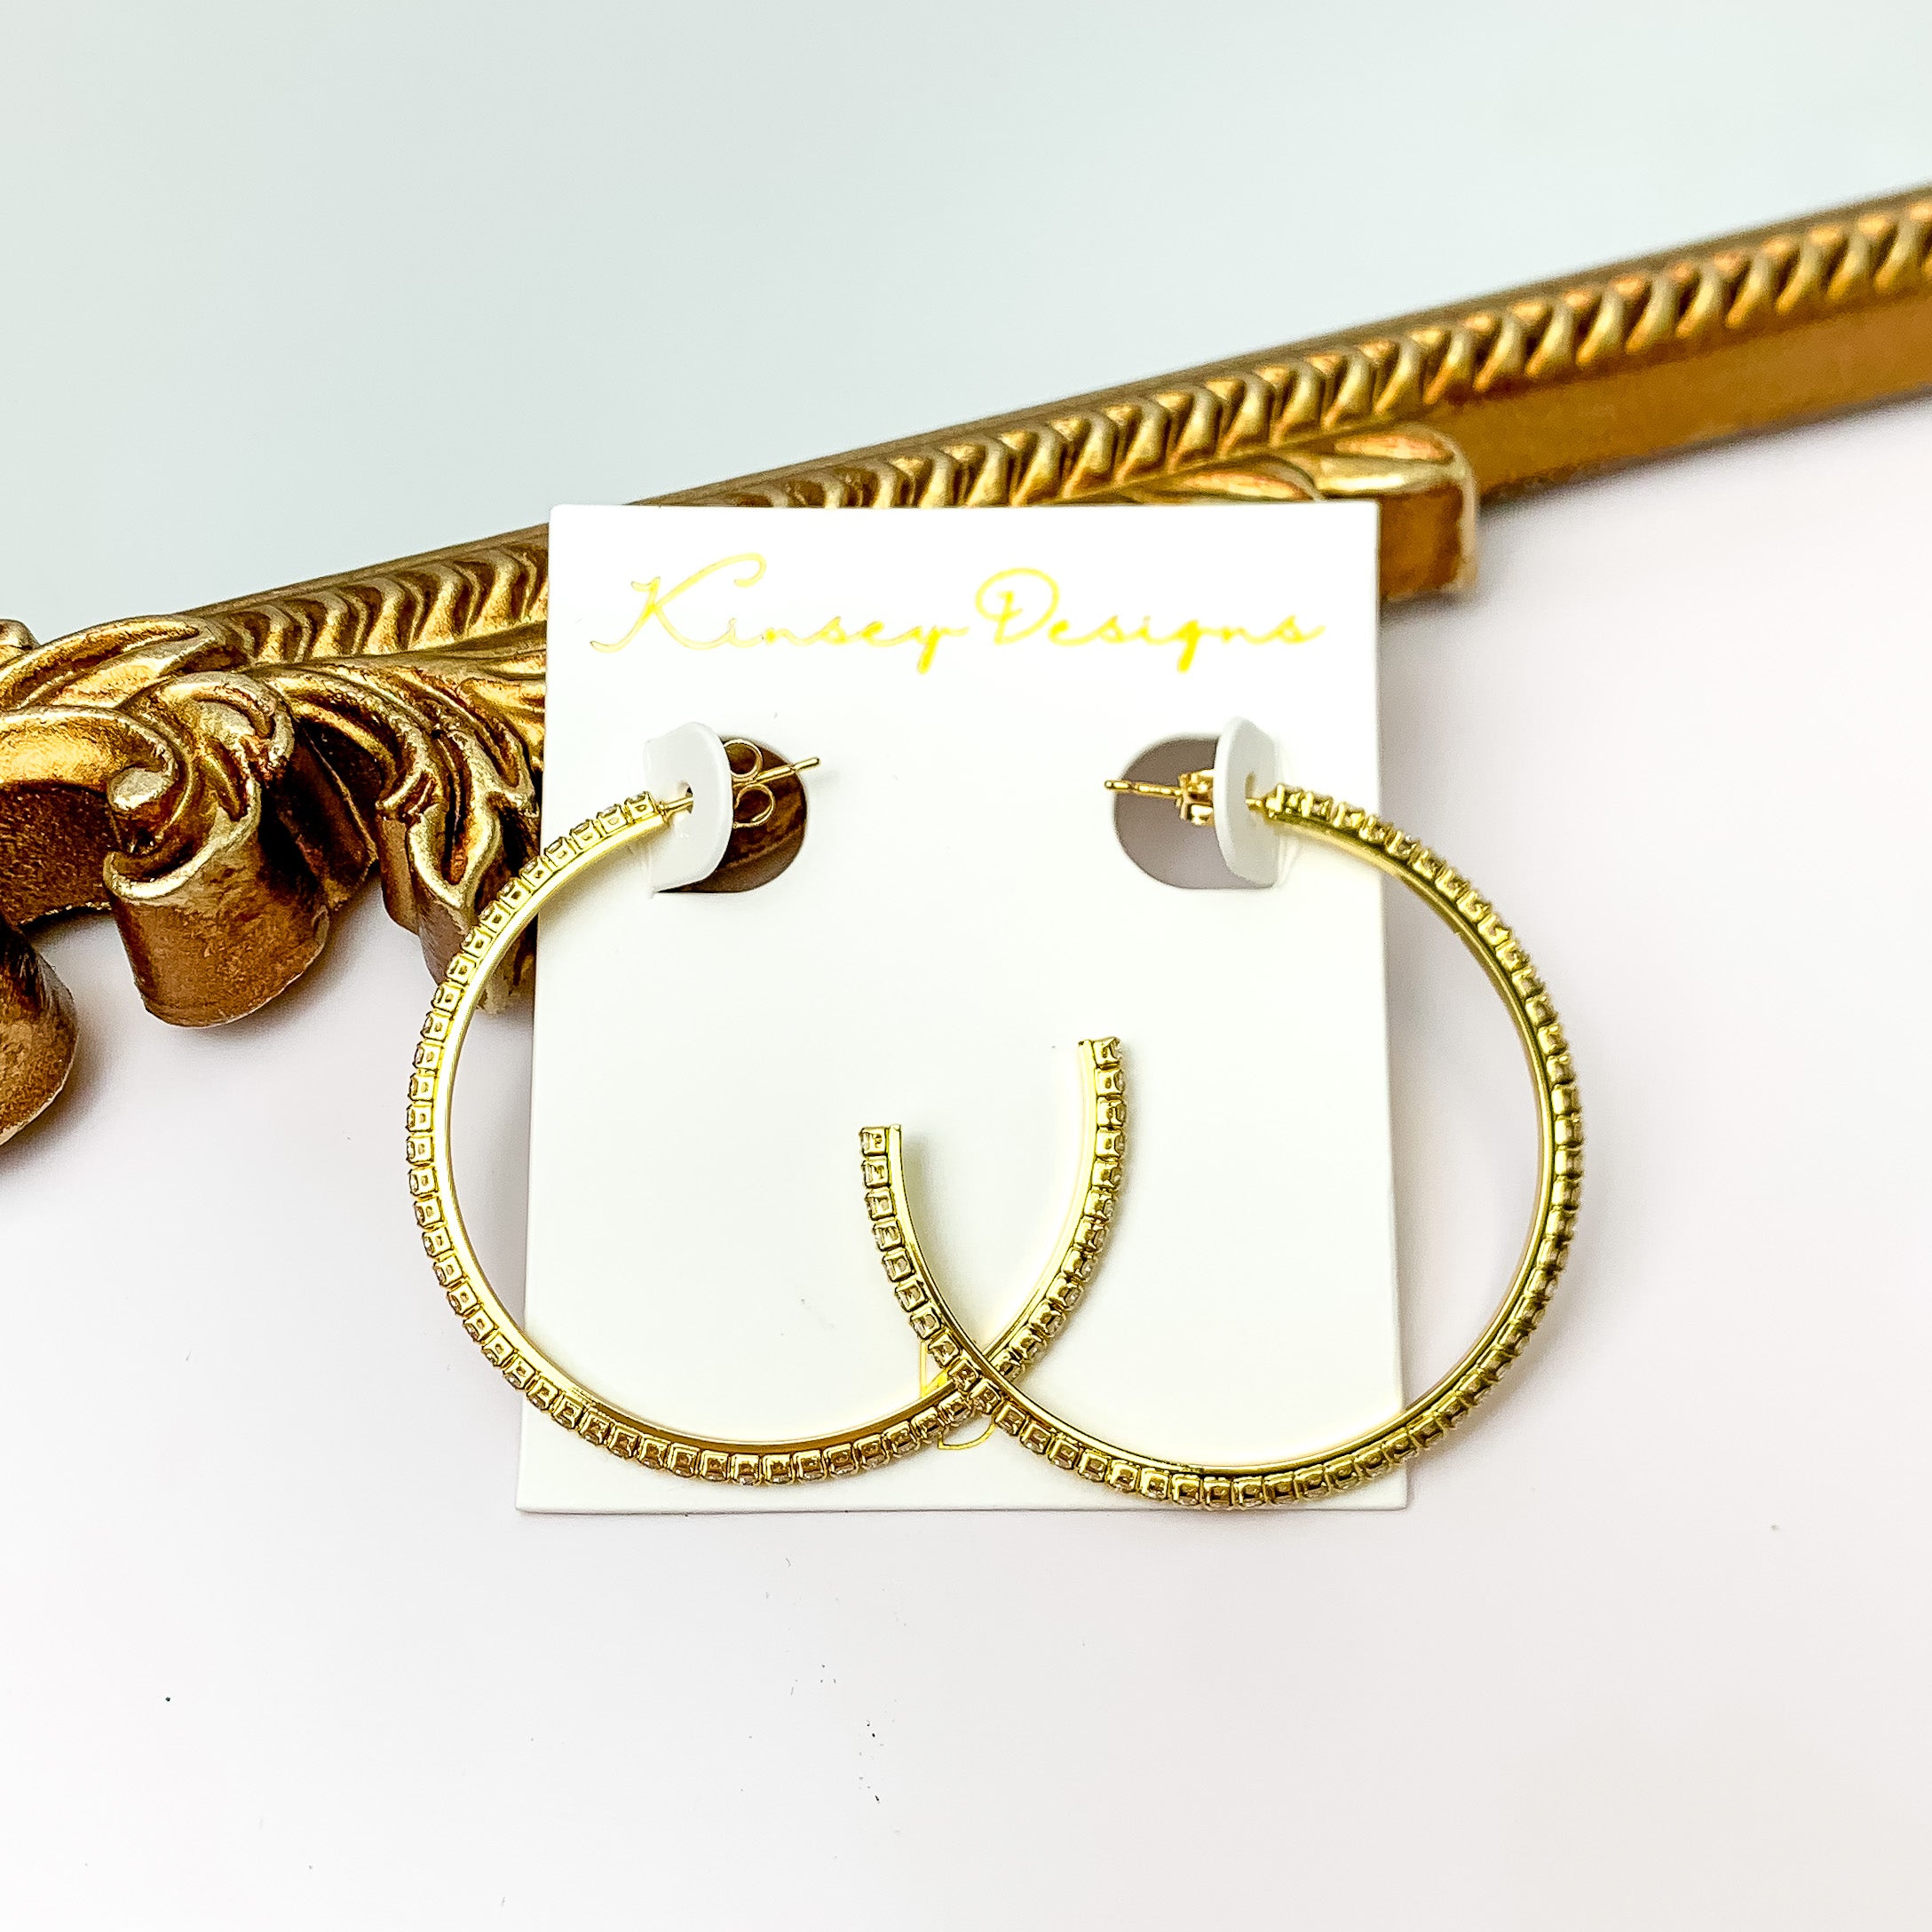 A pair of gold hoop earrings outlined with clear crystals. These earrings are pictured in front of a gold mirror on a white background.  